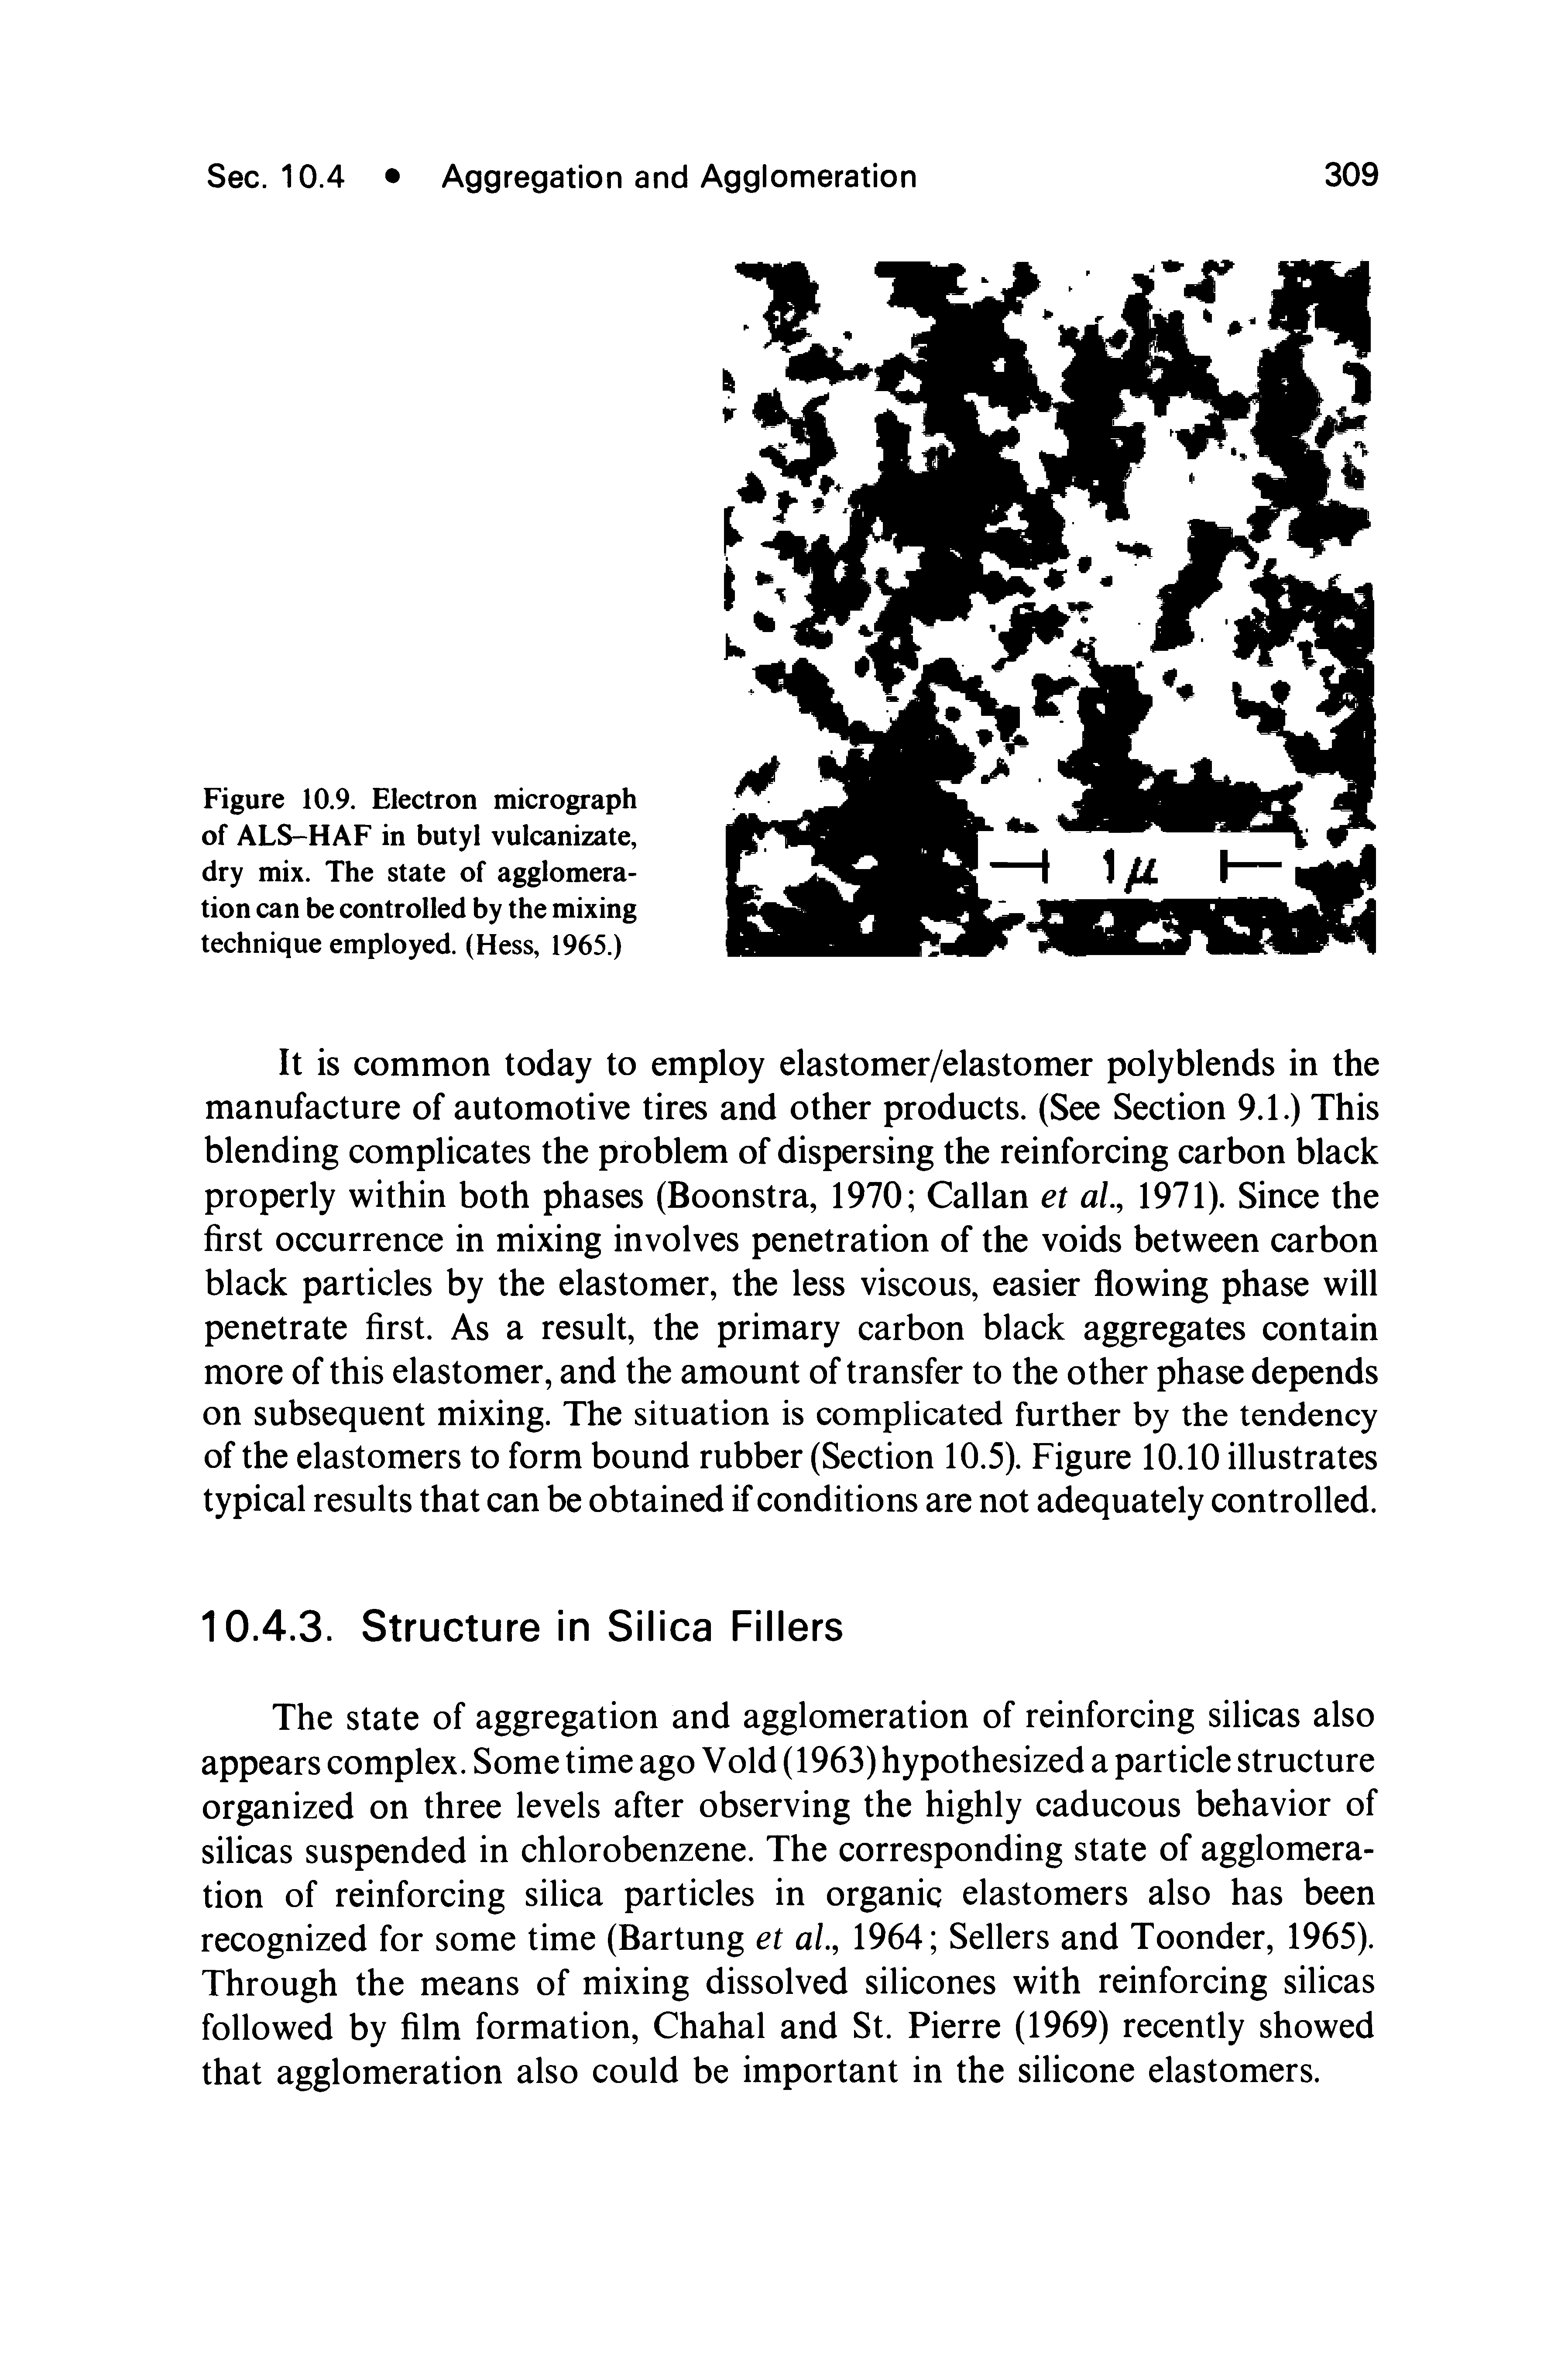 Figure 10.9. Electron micrograph of ALS-HAF in butyl vulcanizate, dry mix. The state of agglomeration can be controlled by the mixing technique employed. (Hess, 1965.)...